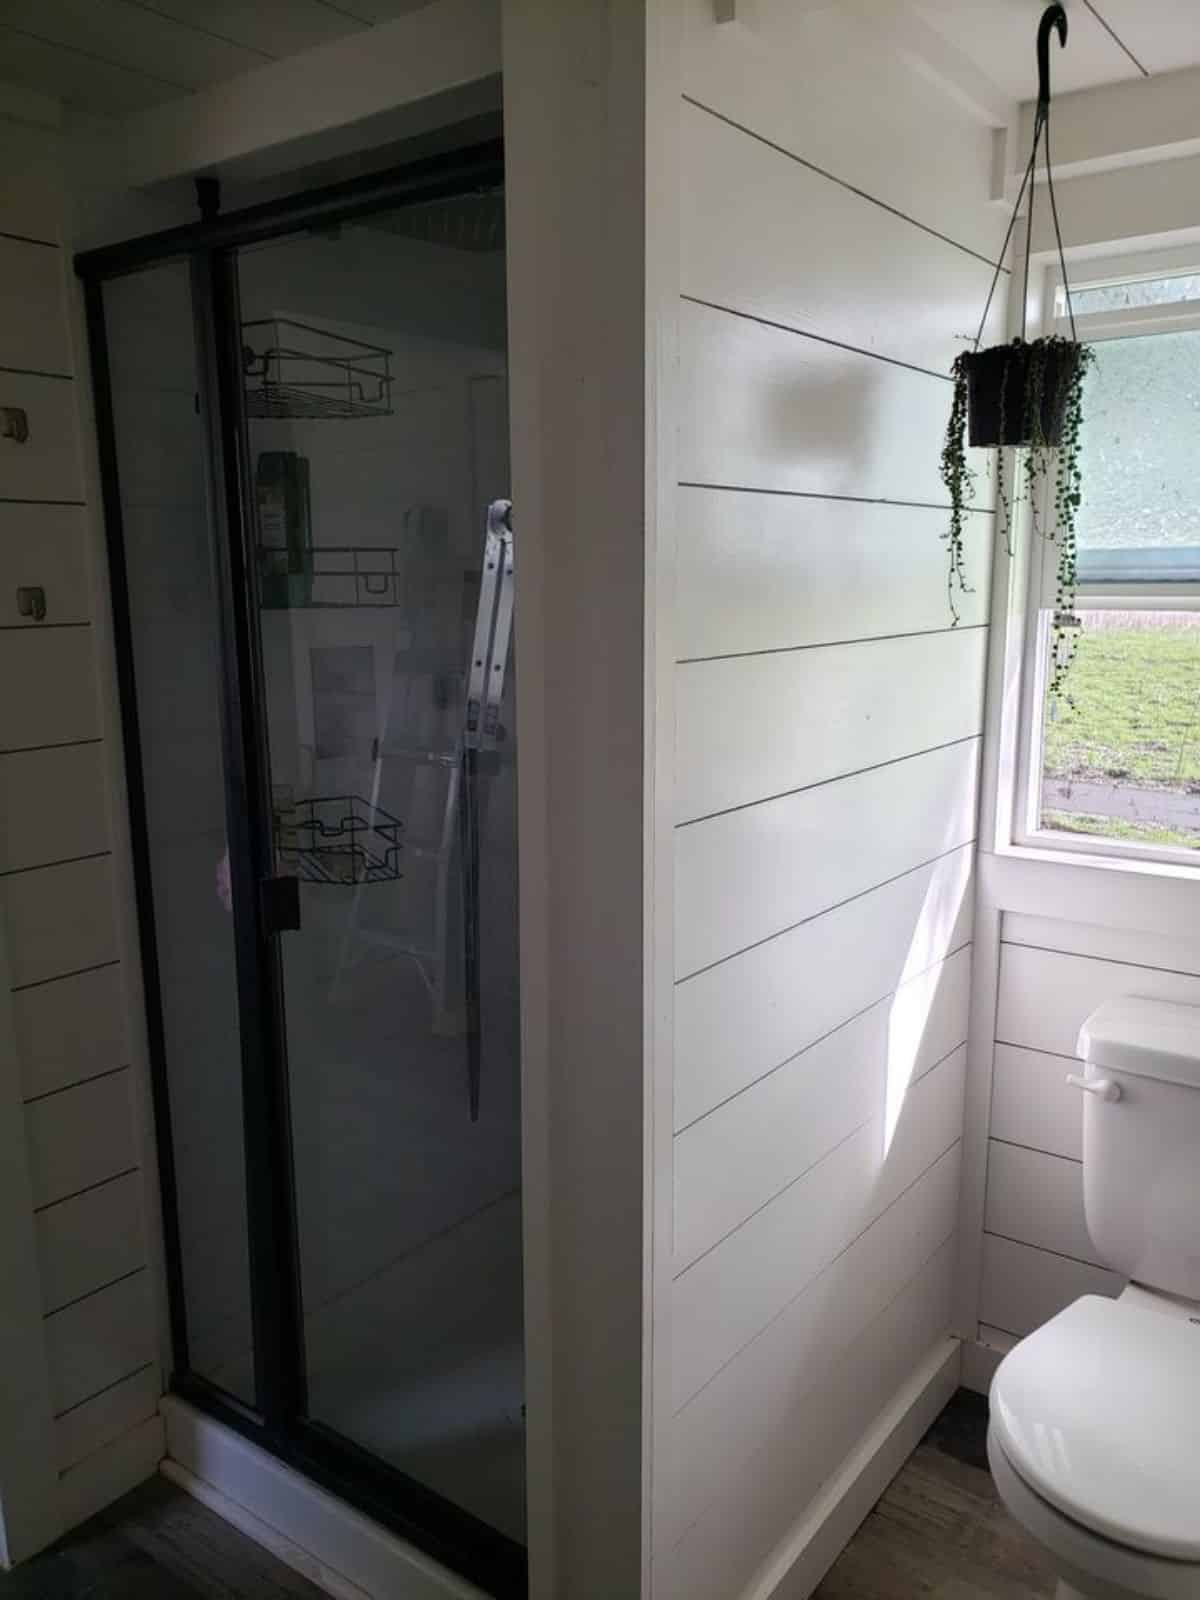 separate shower area with glass enclosure in bathroom